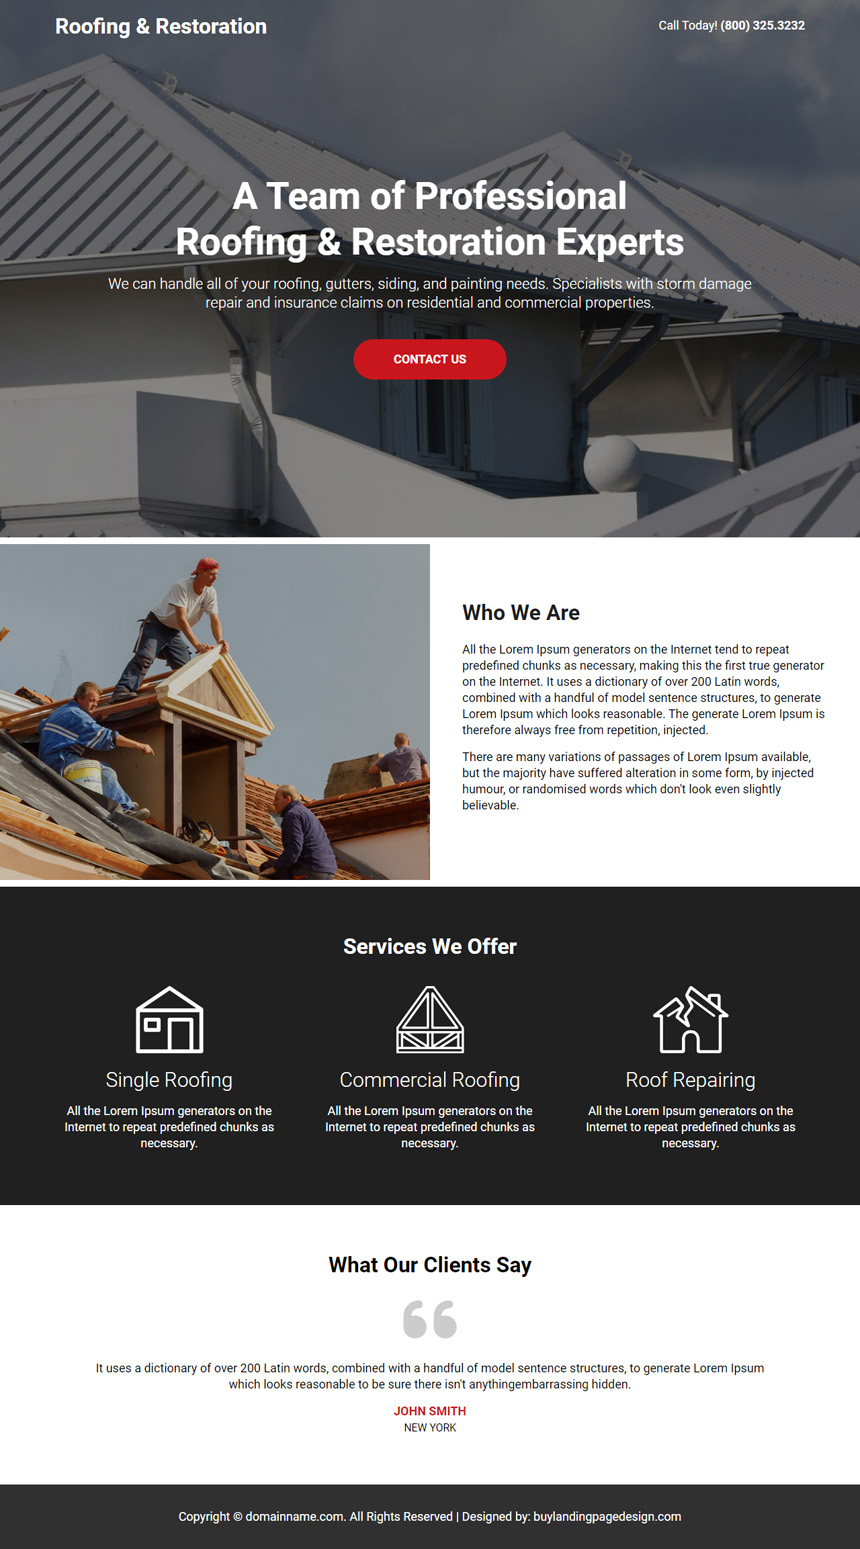 professional roofing and restoration service lead capture landing page